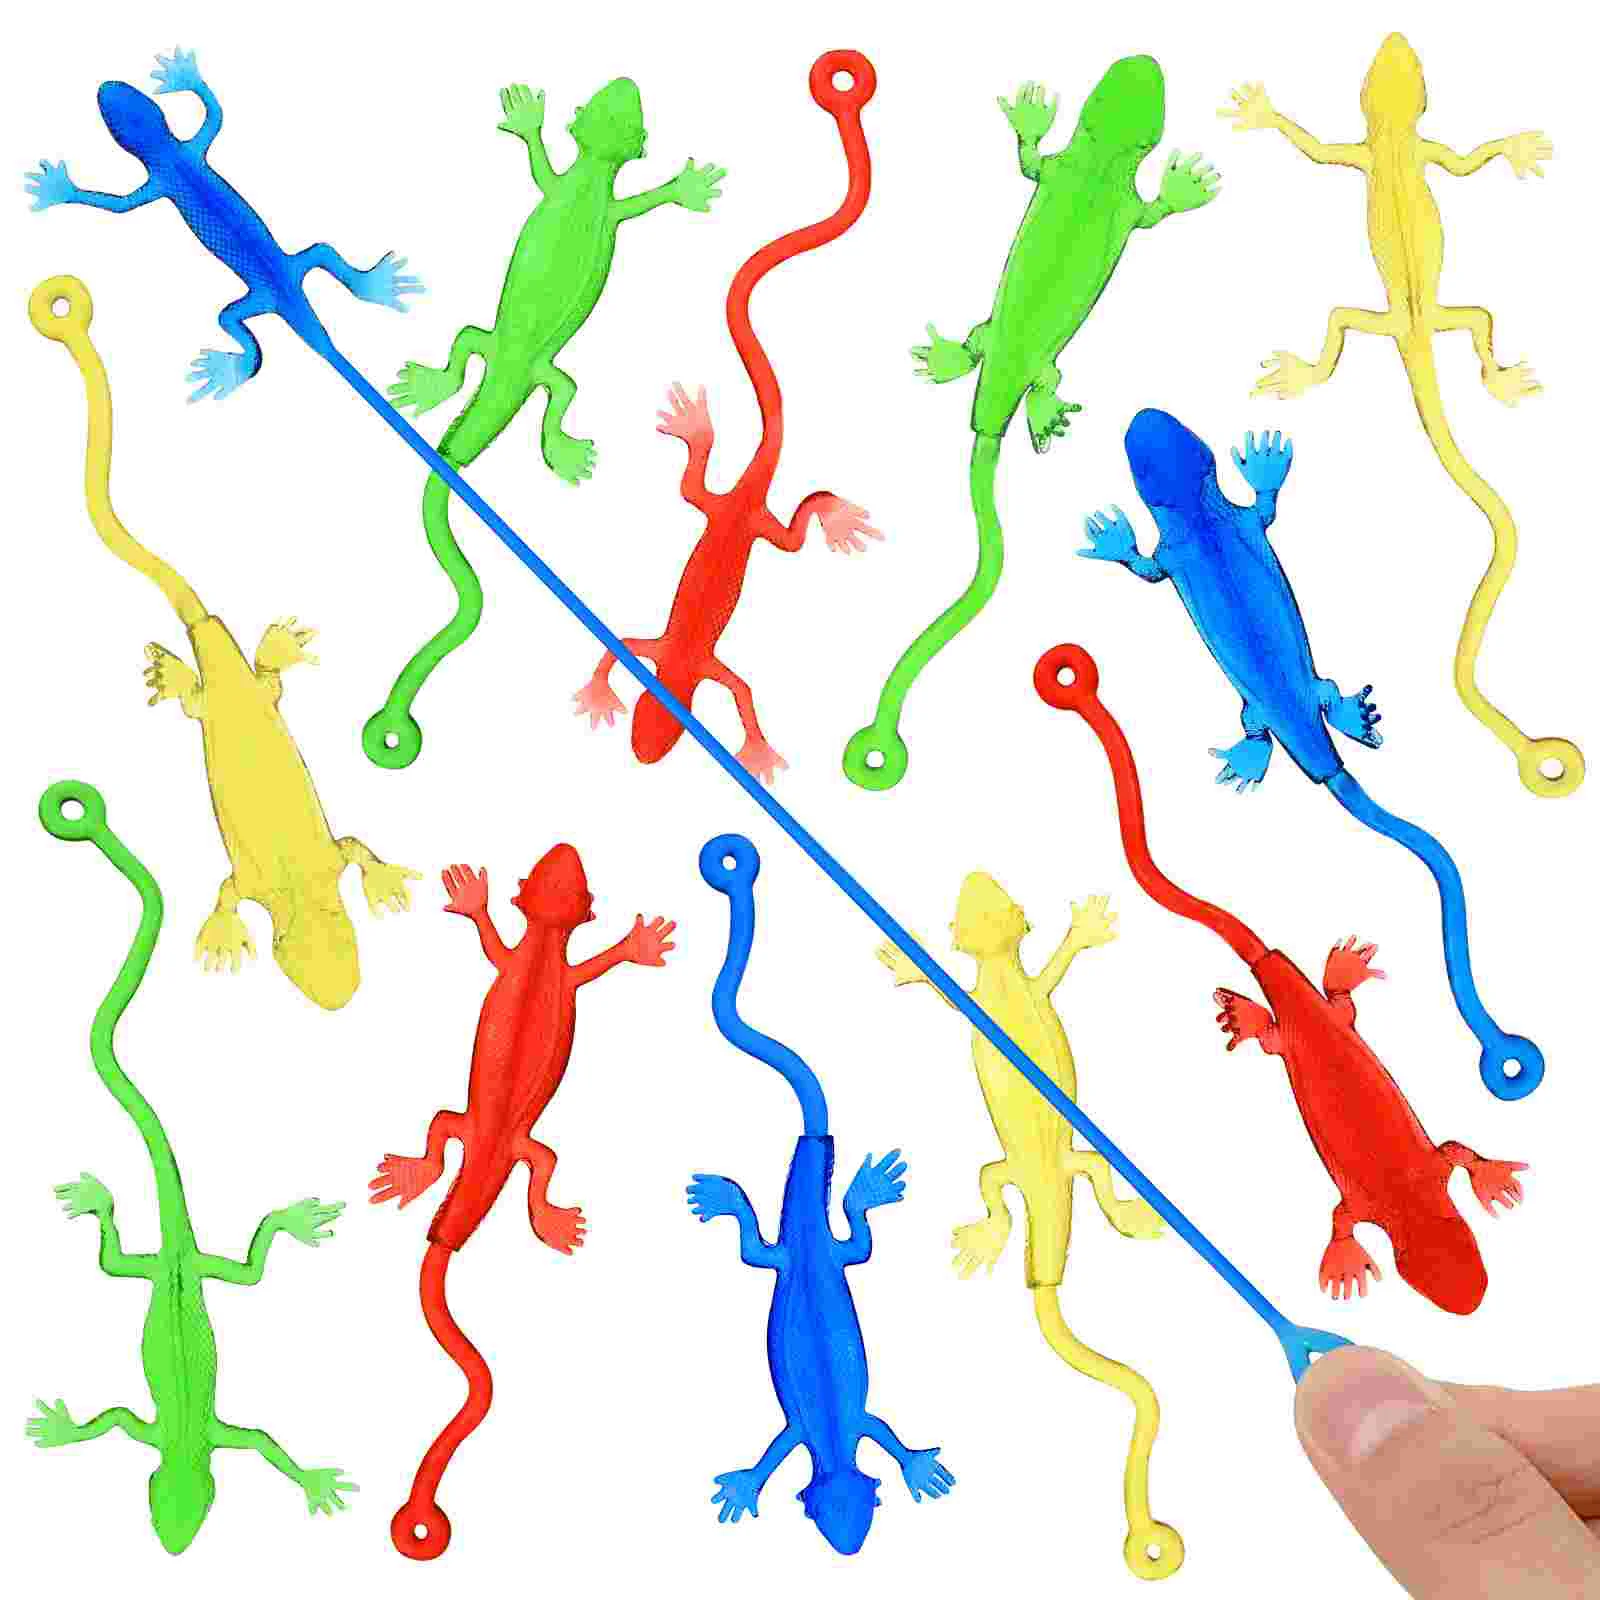 

Stretchy Sticky Lizards Toy: Stretchy Rubbery Sticky Lizards Stretchy Sticky Toys for Kid Party Favor Goodie Bags Easter Egg